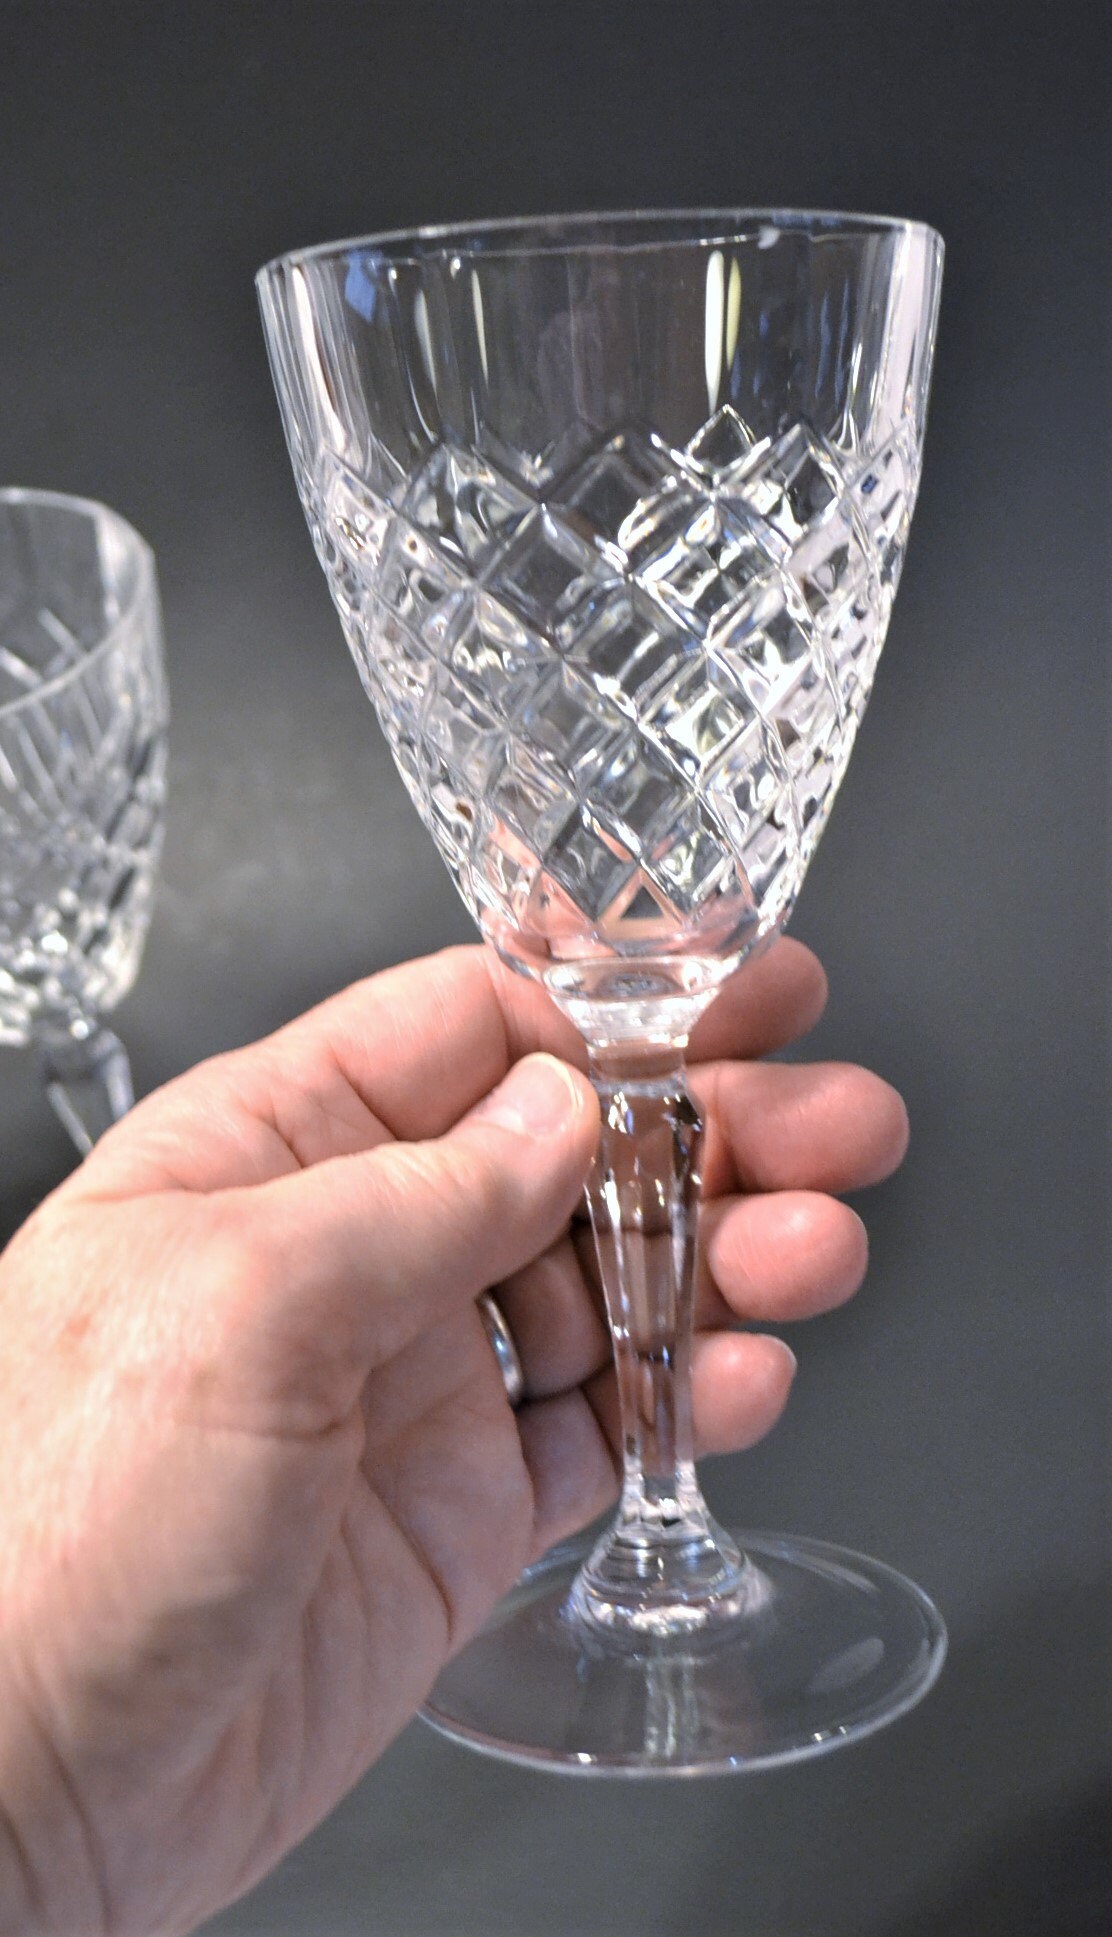 Elegant Crystal Straight Edge Design - Set of 4 Wine Glasses, Size: One size, Clear